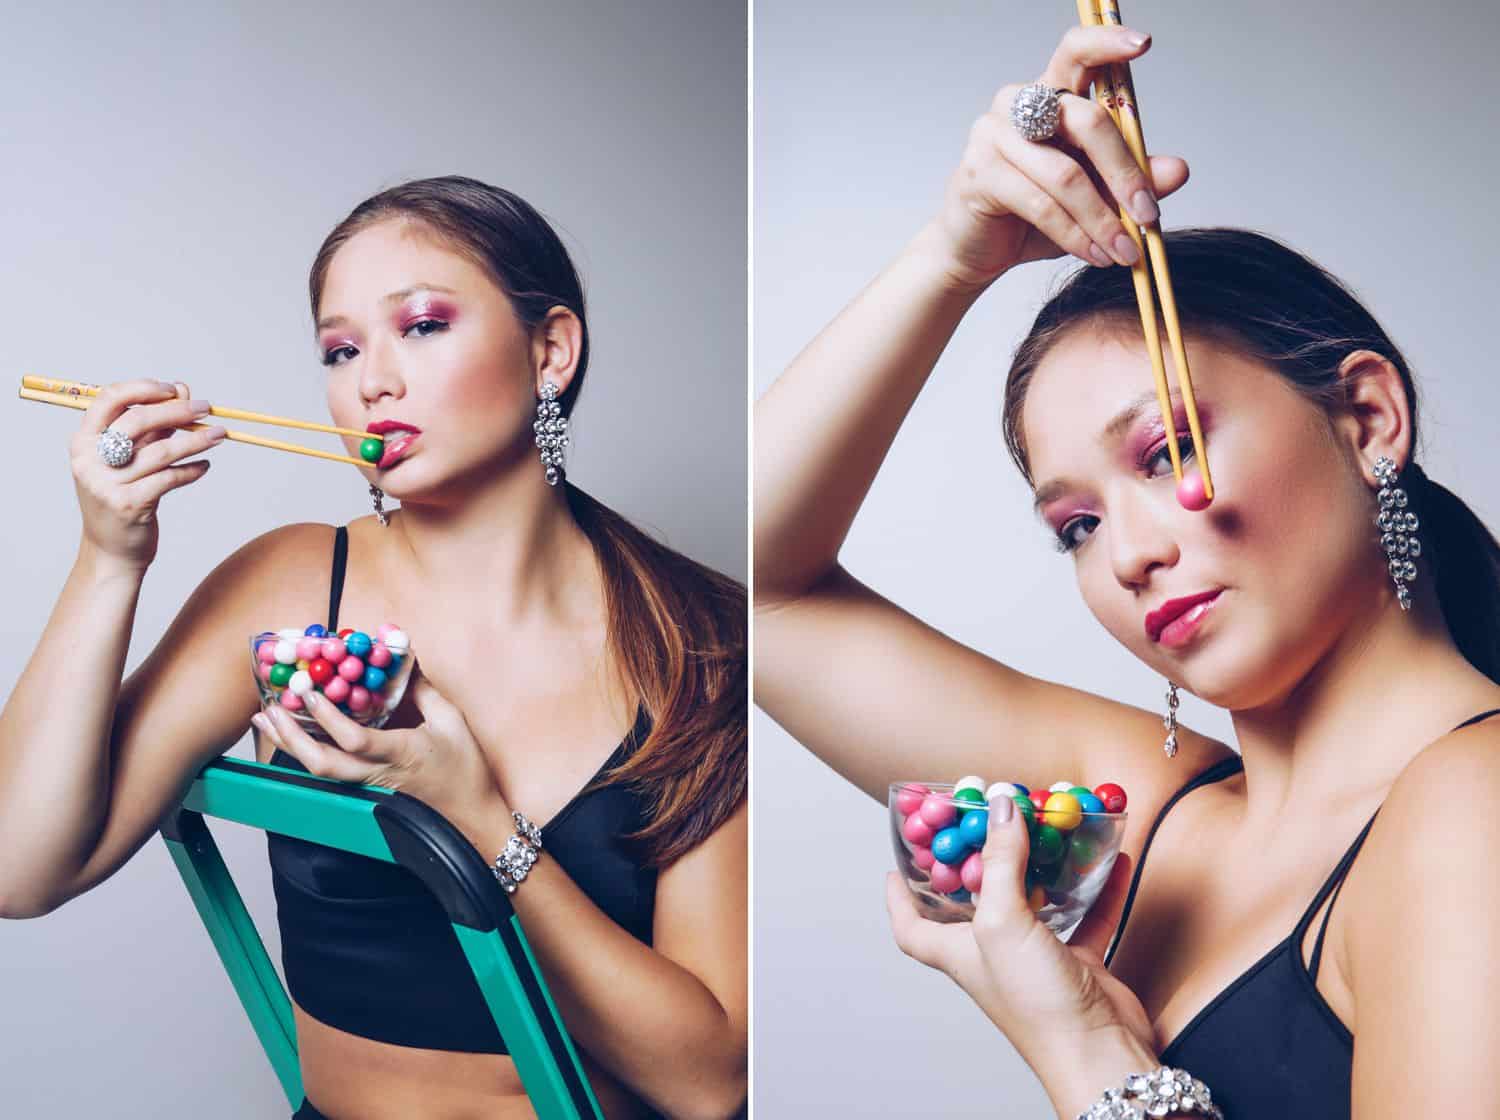 An Asian model in a black bustier top poses with gumballs and chopsticks